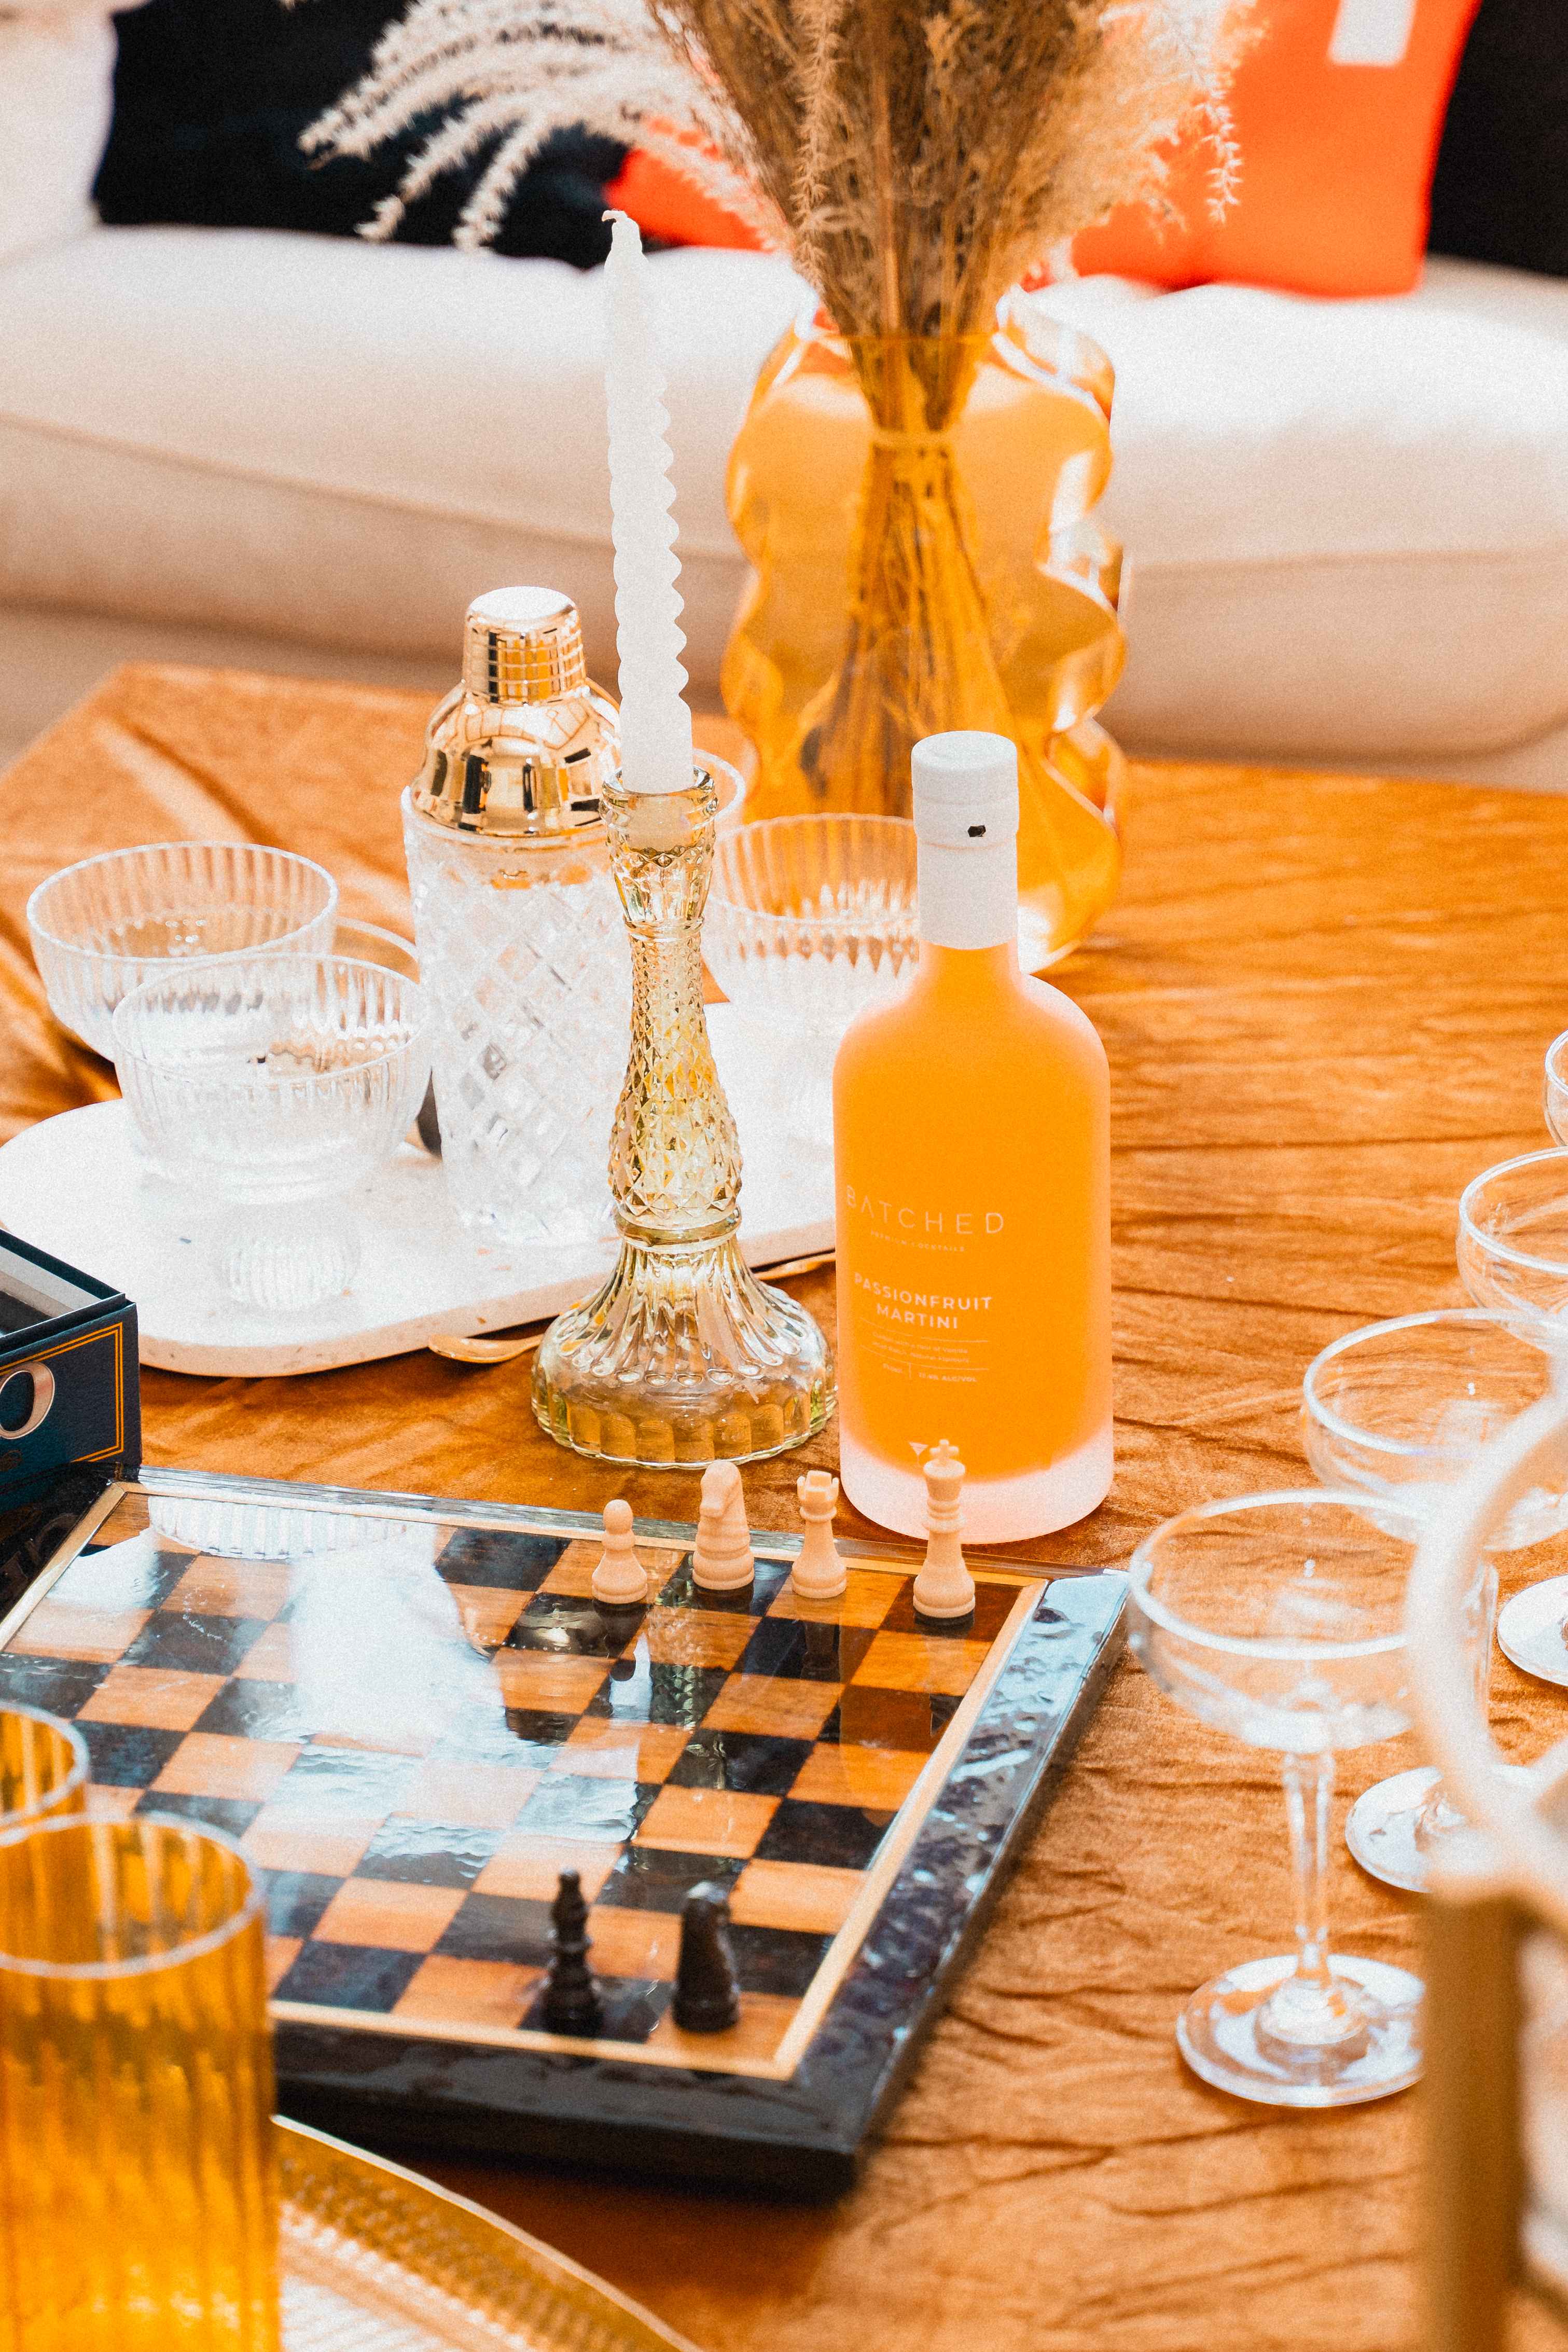 Batched Passionfruit Martini on table with chess board and decorations